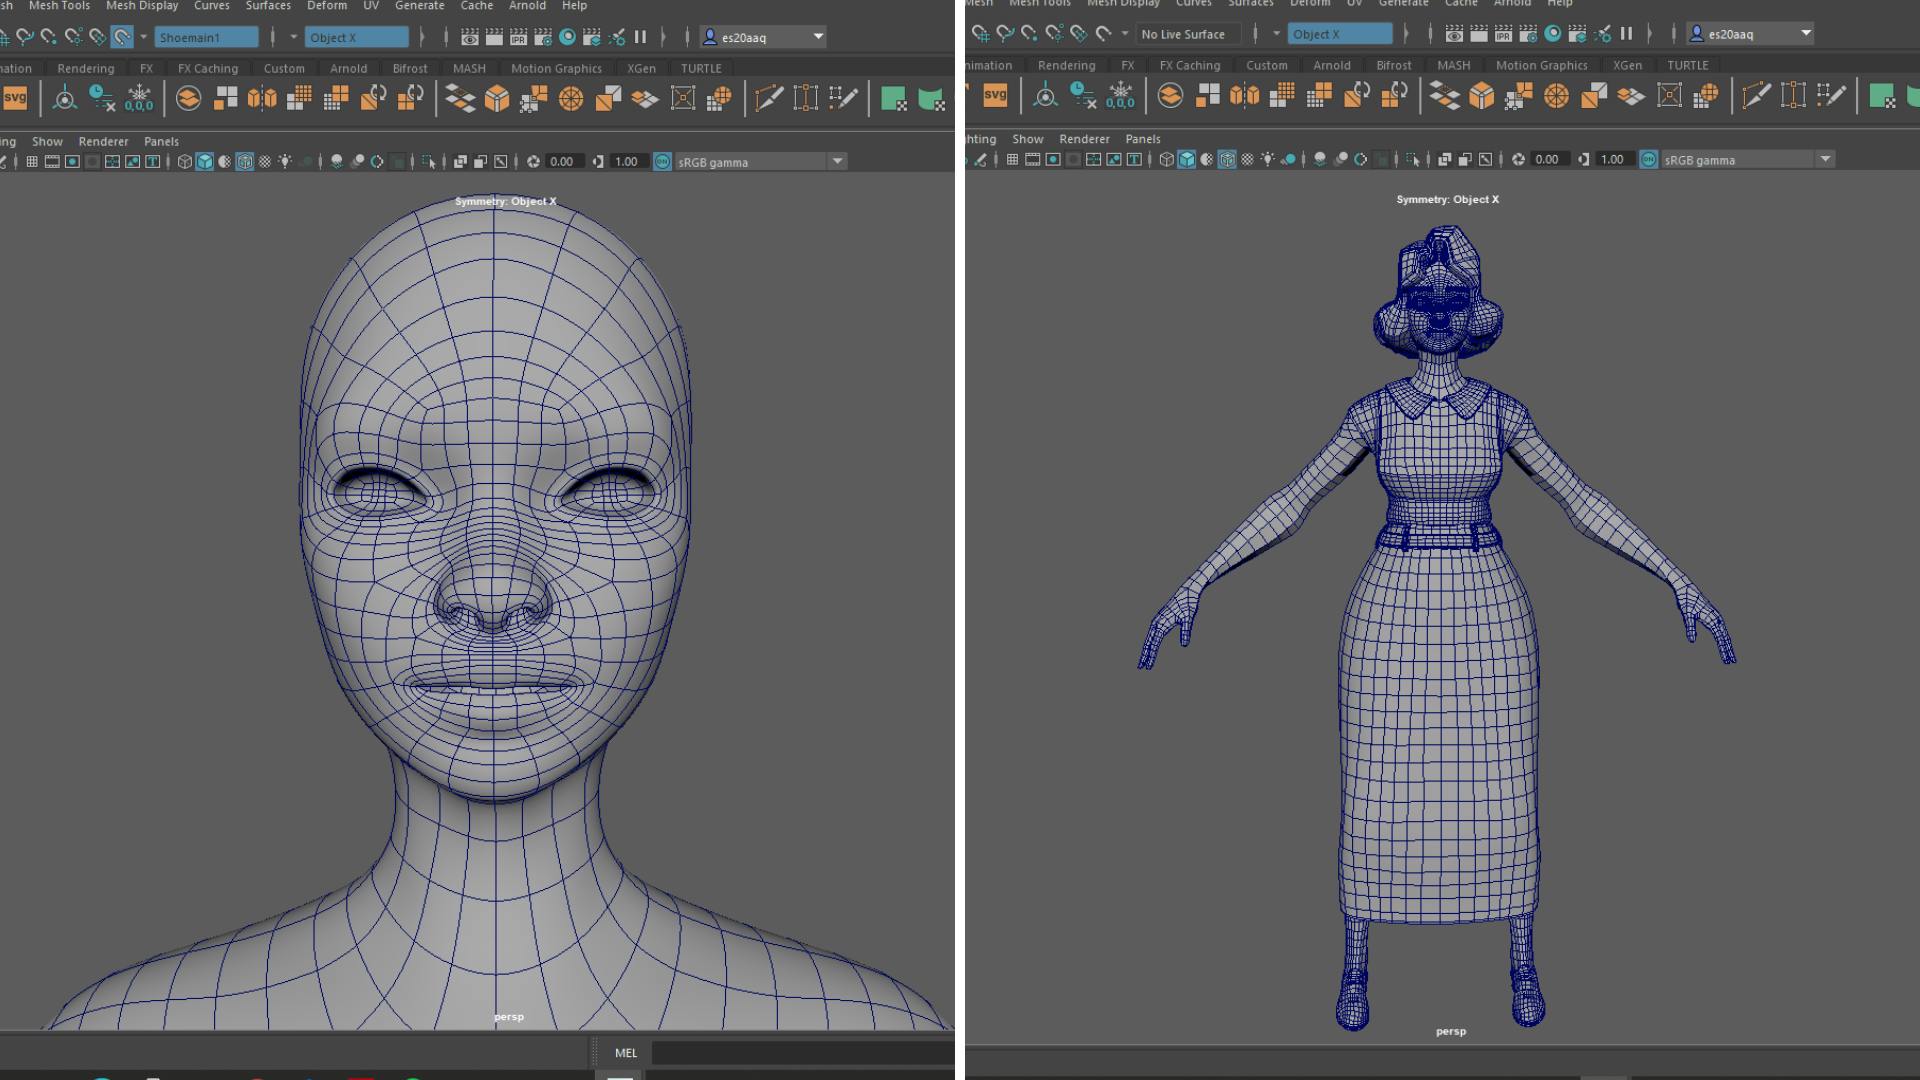 Two images of the retopology process. On the right, a close-up of the Phyllis model's head and shoulders. On the left, a shot of Phyllis's full body. Both models are pale grey with a blue grid overlaid, a bit like a blueprint. 